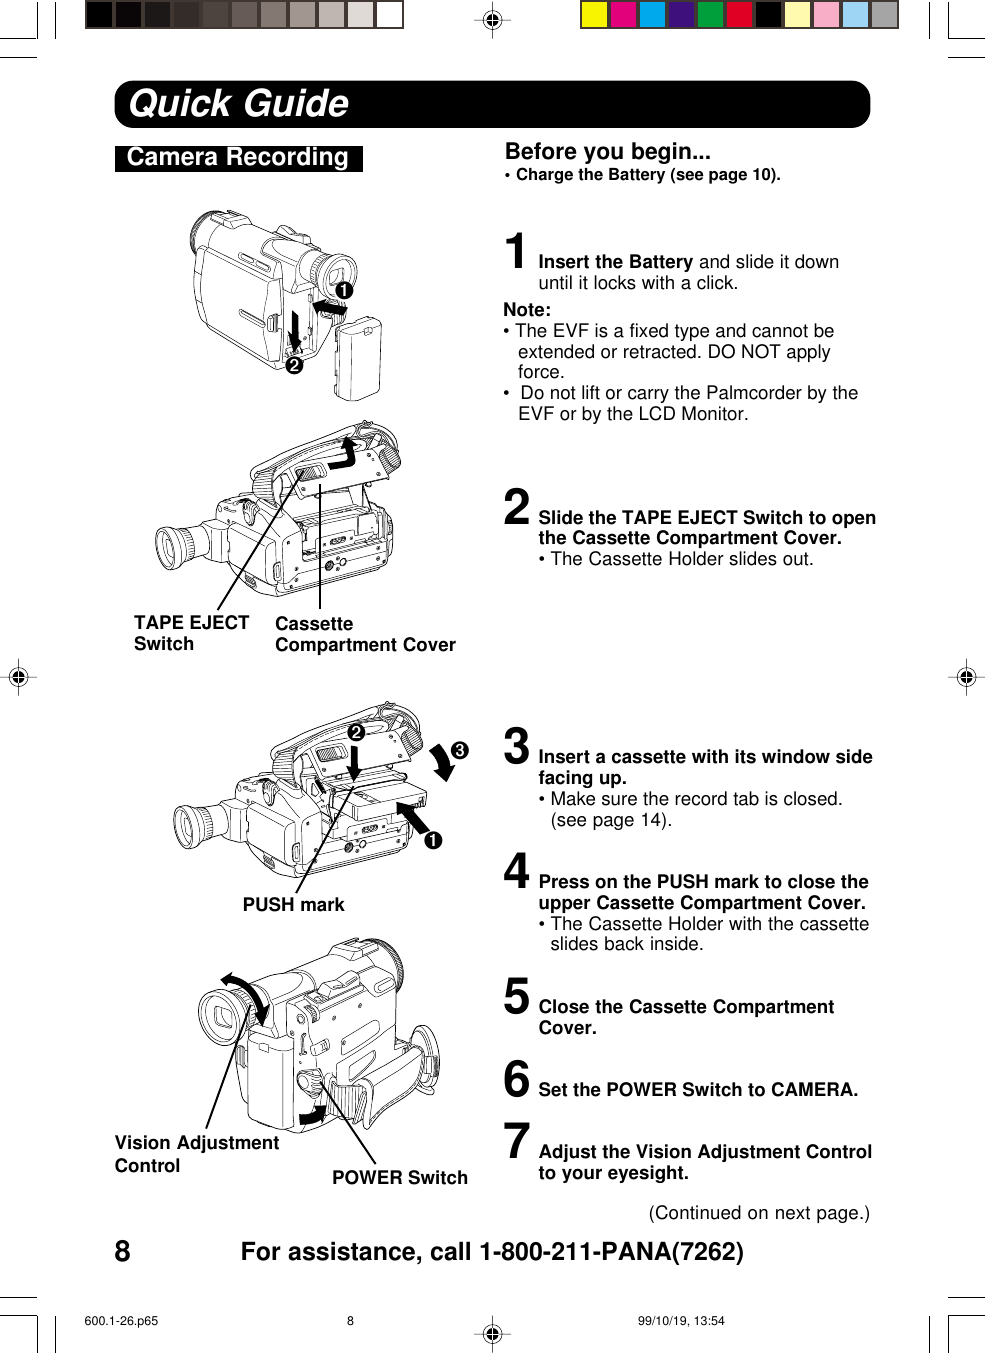 8For assistance, call 1-800-211-PANA(7262)Camera Recording Before you begin...•Charge the Battery (see page 10).1Insert the Battery and slide it downuntil it locks with a click.Note:• The EVF is a fixed type and cannot beextended or retracted. DO NOT applyforce.•  Do not lift or carry the Palmcorder by theEVF or by the LCD Monitor.2Slide the TAPE EJECT Switch to openthe Cassette Compartment Cover.•The Cassette Holder slides out.3Insert a cassette with its window sidefacing up.•Make sure the record tab is closed.(see page 14).4Press on the PUSH mark to close theupper Cassette Compartment Cover.•The Cassette Holder with the cassetteslides back inside.5Close the Cassette CompartmentCover.6Set the POWER Switch to CAMERA.7Adjust the Vision Adjustment Controlto your eyesight.Quick Guide(Continued on next page.)Vision AdjustmentControlPUSH markTAPE EJECTSwitch CassetteCompartment Cover➊➋➌POWER Switch➊➋600.1-26.p65 99/10/19, 13:548